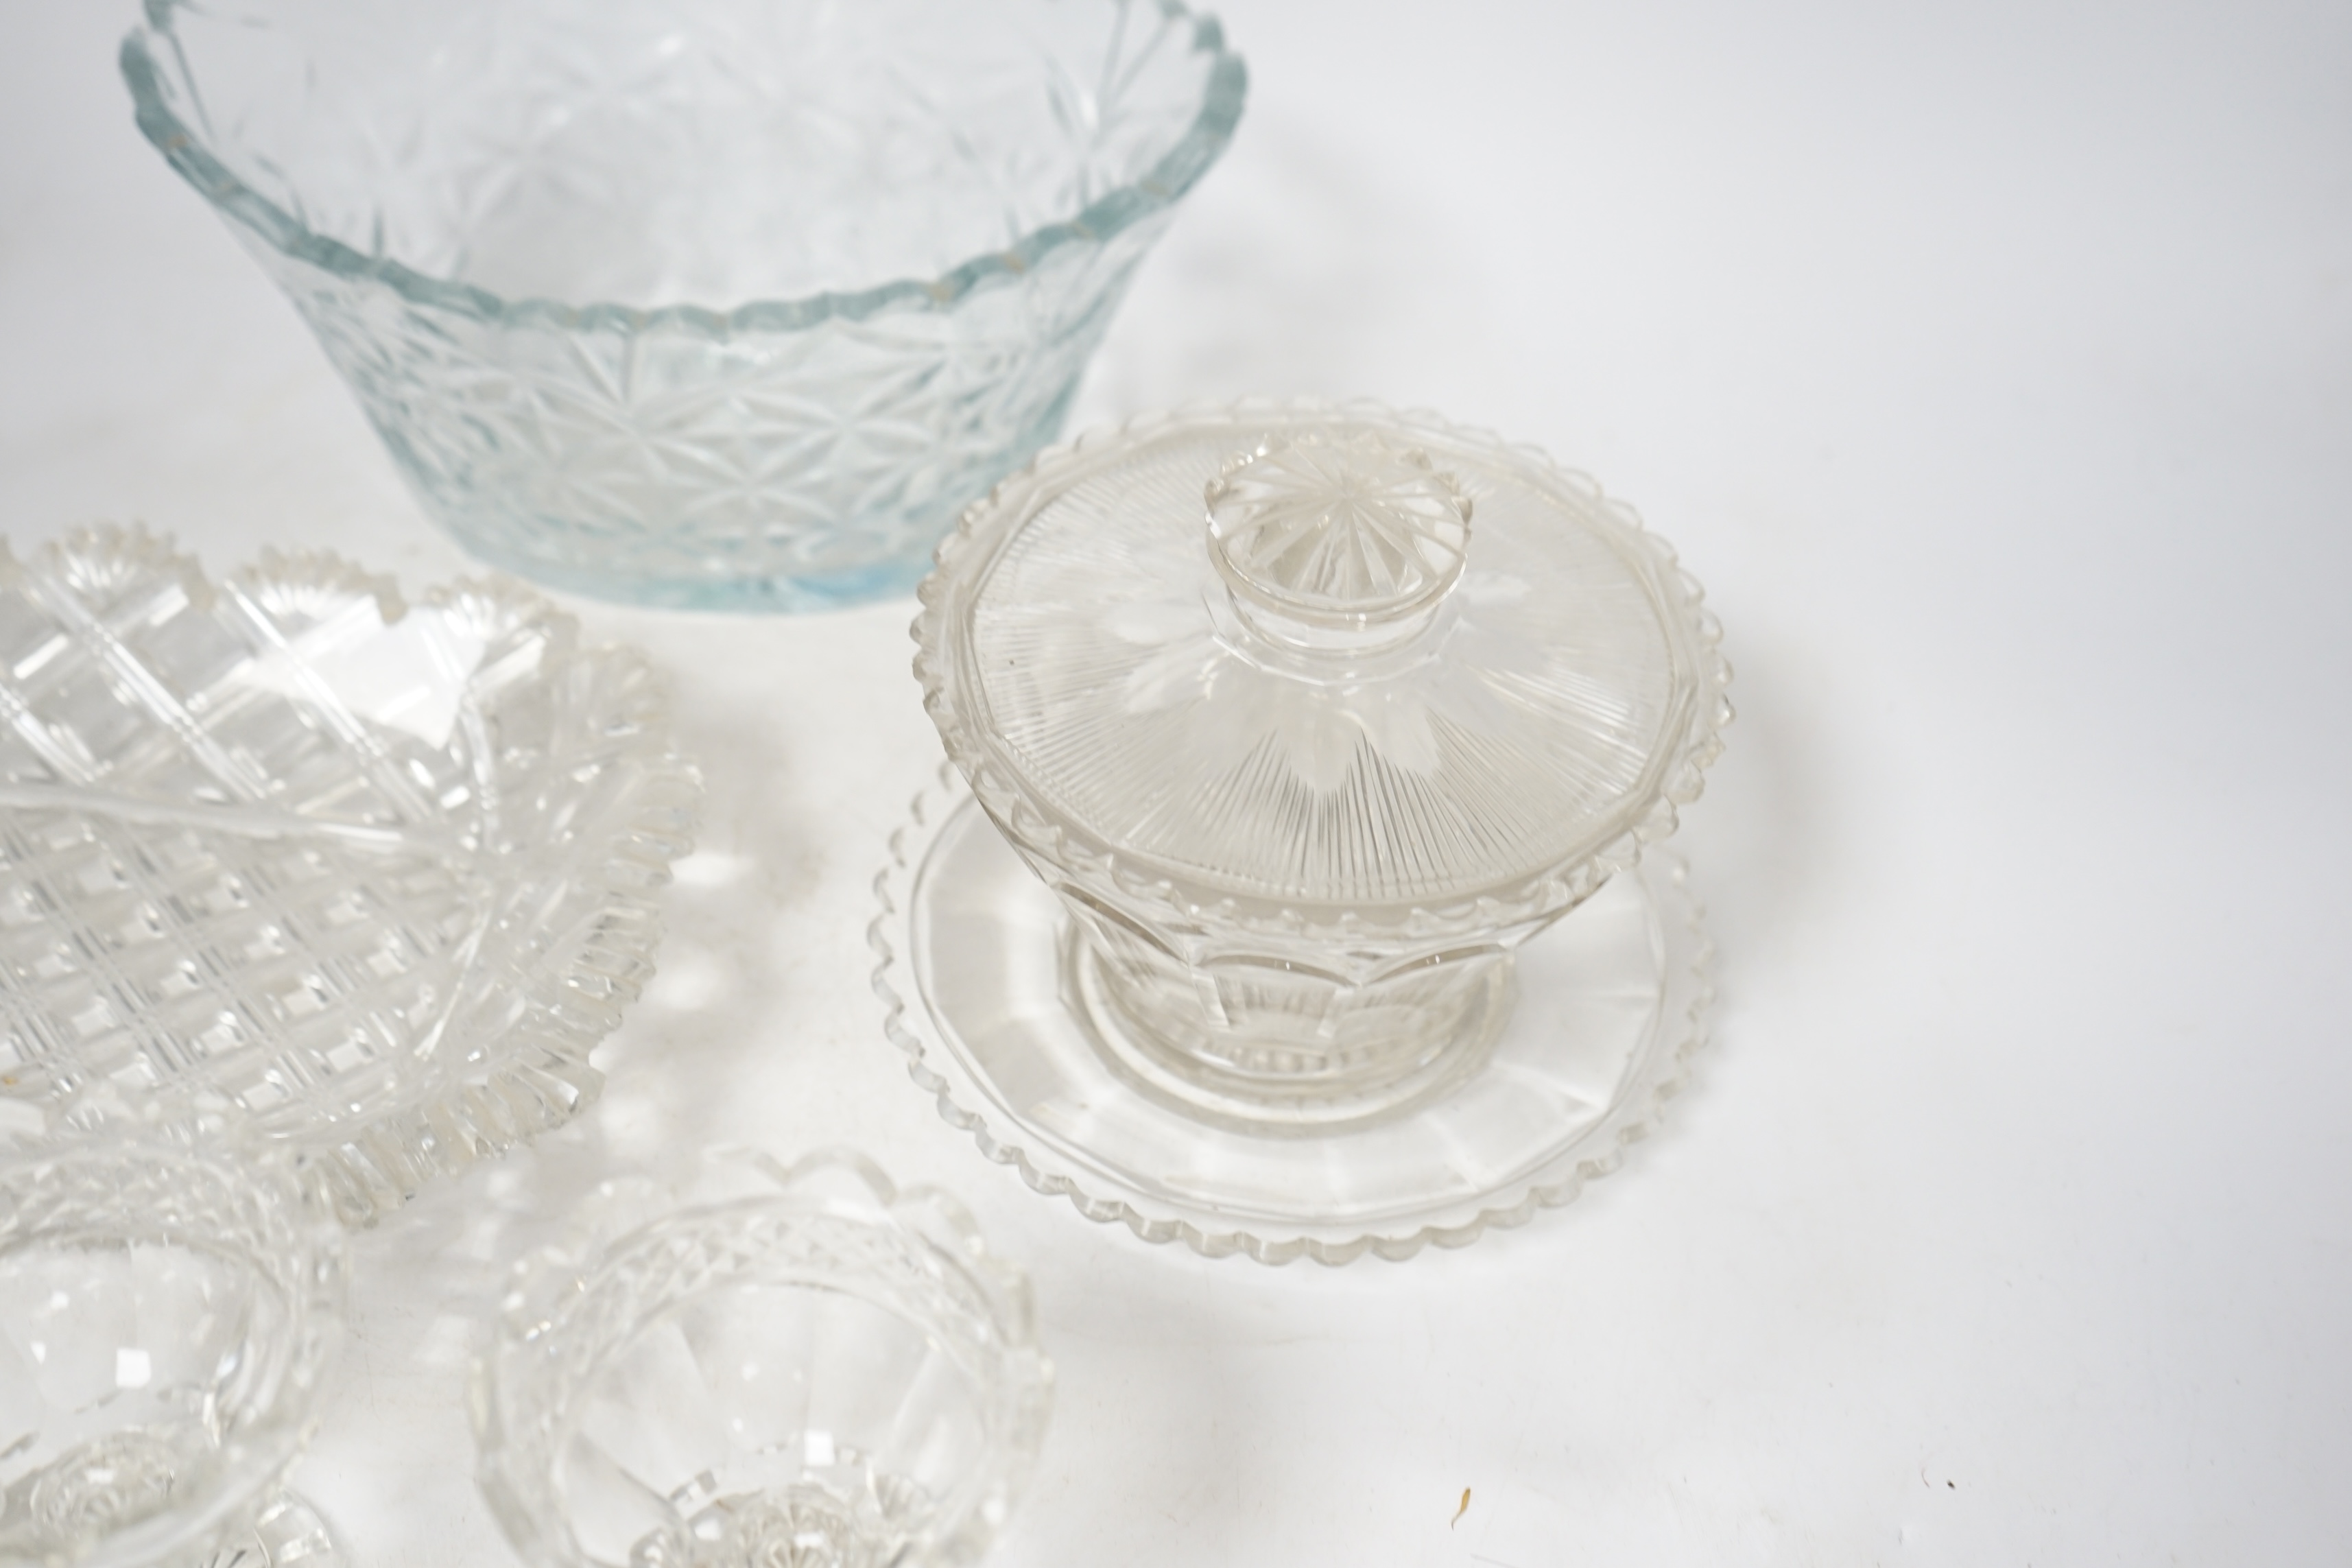 Six pieces of 19th century cut glass including a bon bon dish and a pair of glasses, largest 23cm. Condition - poor to fair, some chips